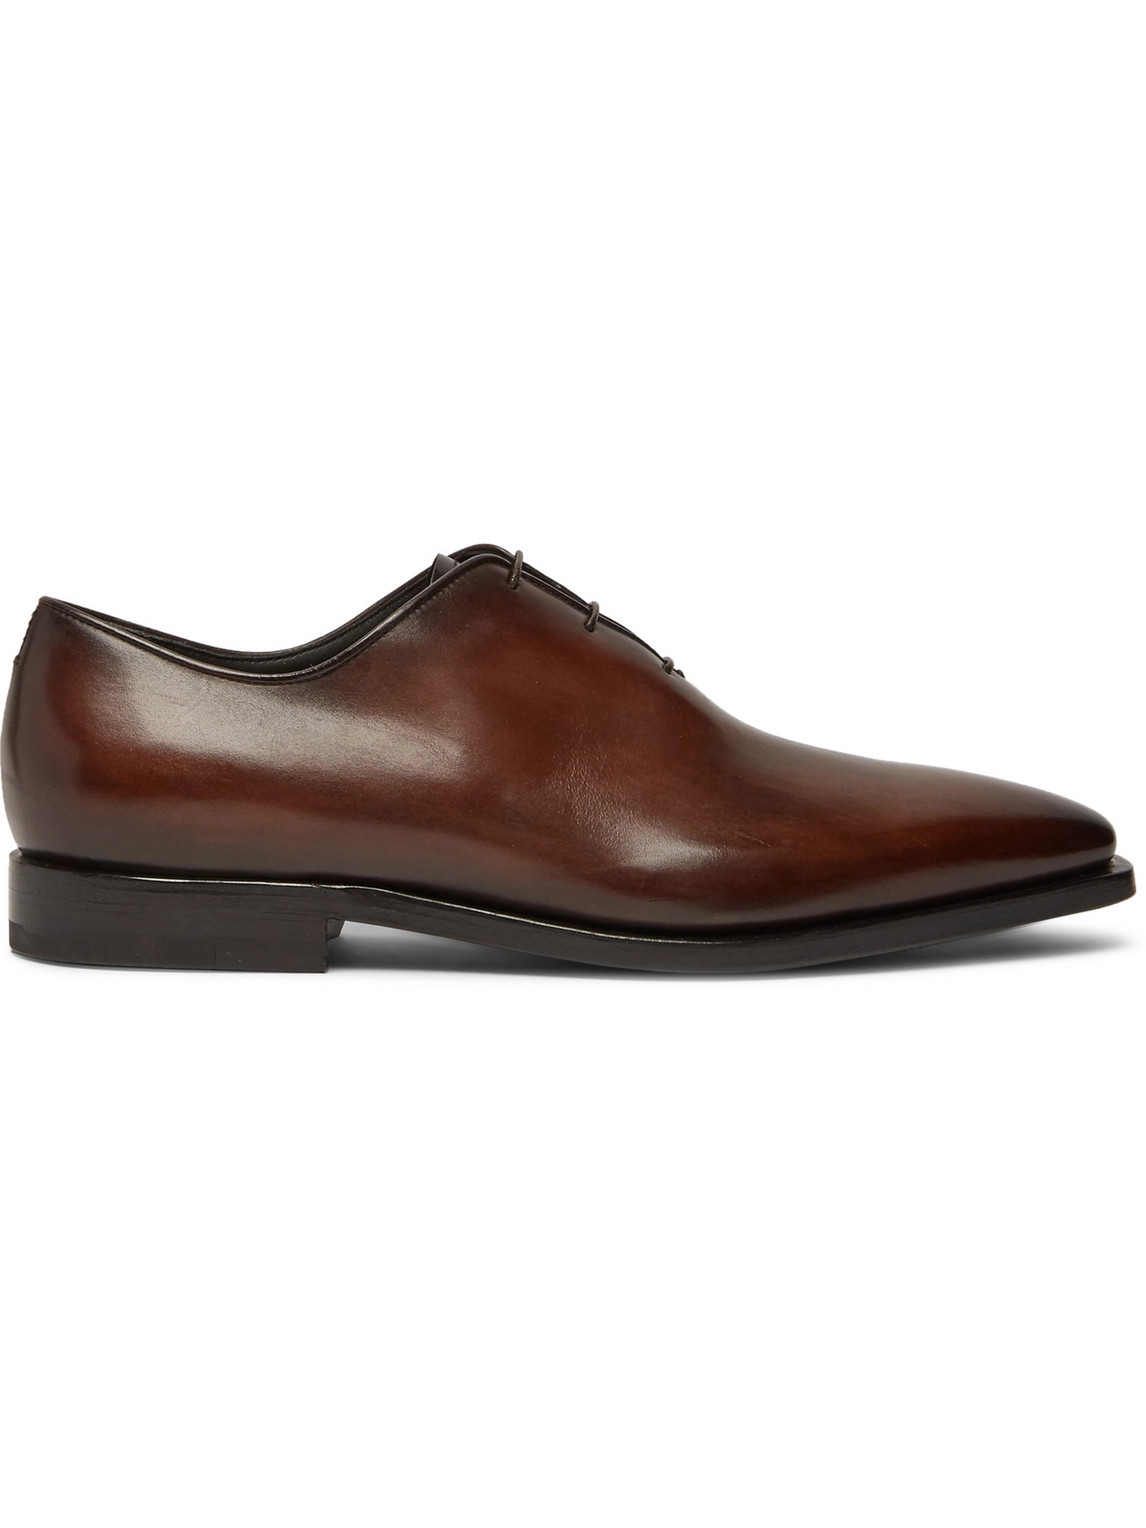 BERLUTI ALESSANDRO ECLAIR WHOLE-CUT LEATHER OXFORD SHOES